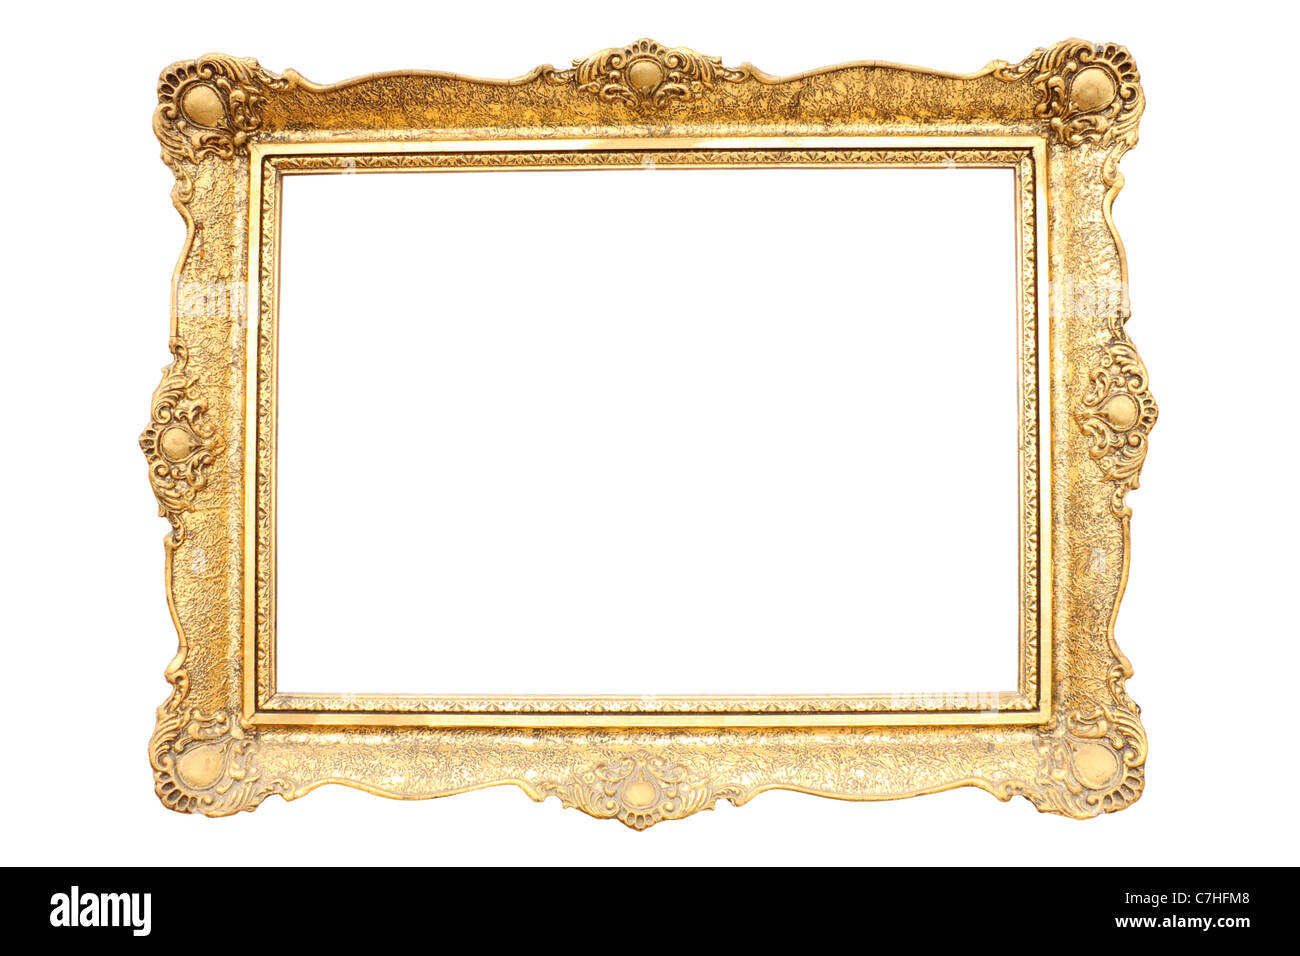 Vintage Gold Picture Frame With Wooden Easel Isolated On White Background  Stock Photo, Picture and Royalty Free Image. Image 12660370.